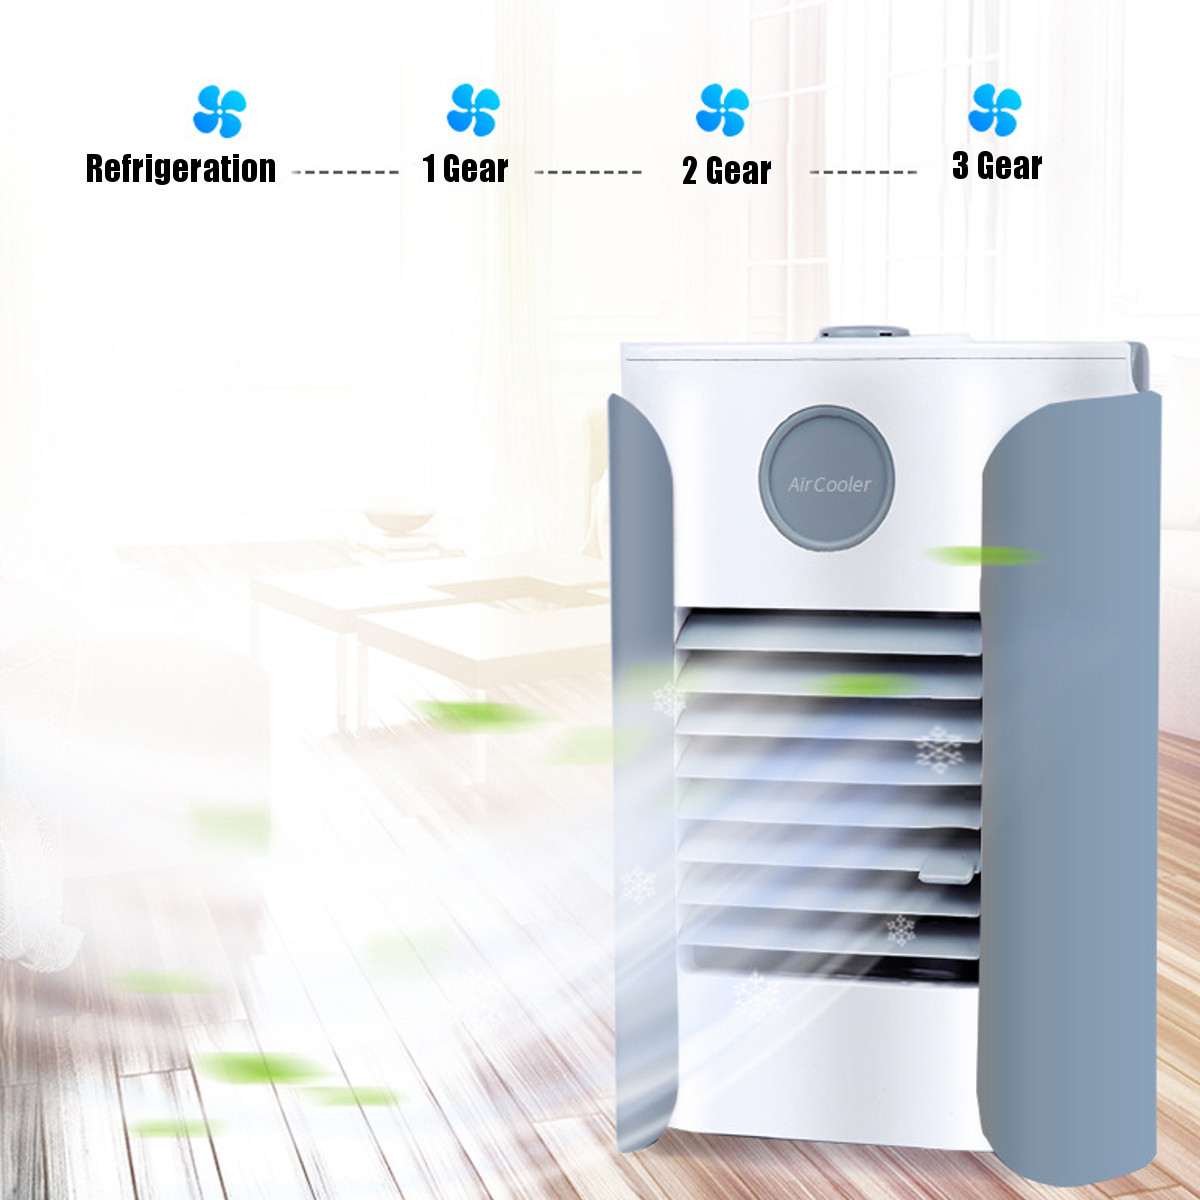 USB-Mini-Portable-Bluetooth-Radio-Air-Cooler-Humidifier-Conditioning-Mute-Spray-Cooling-Fan-1690137-4